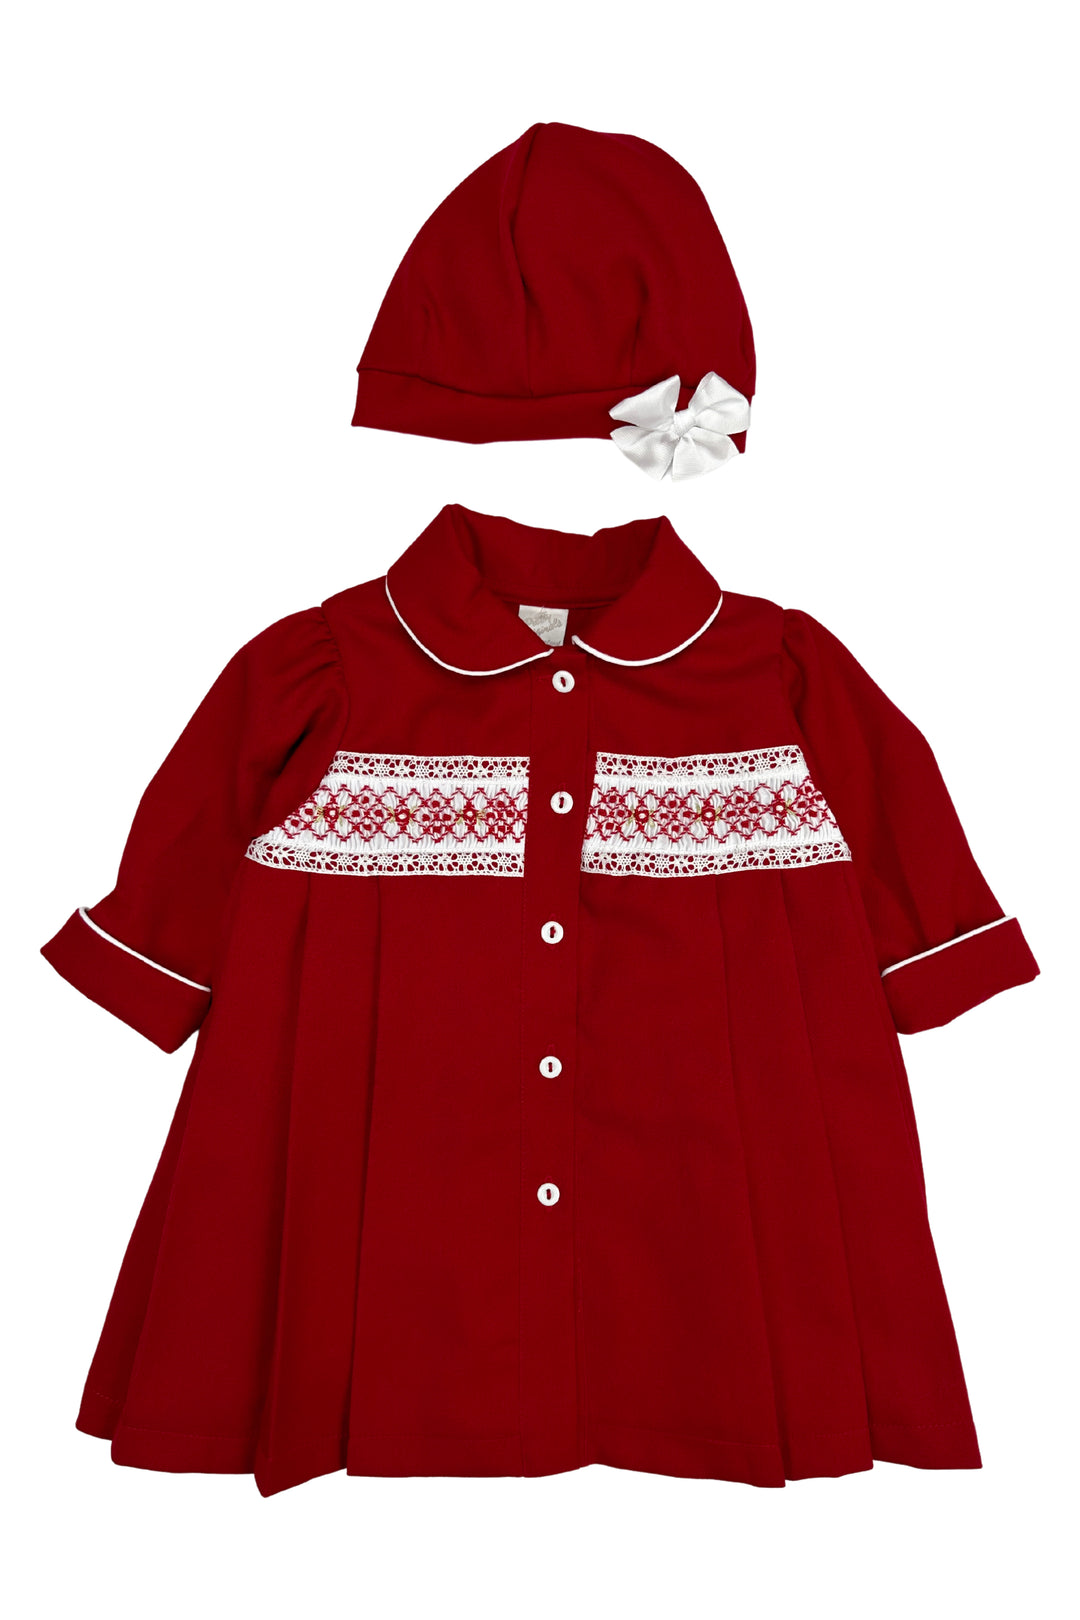 Pretty Originals "Gabrielle" Red Smocked Coat & Hat | Millie and John